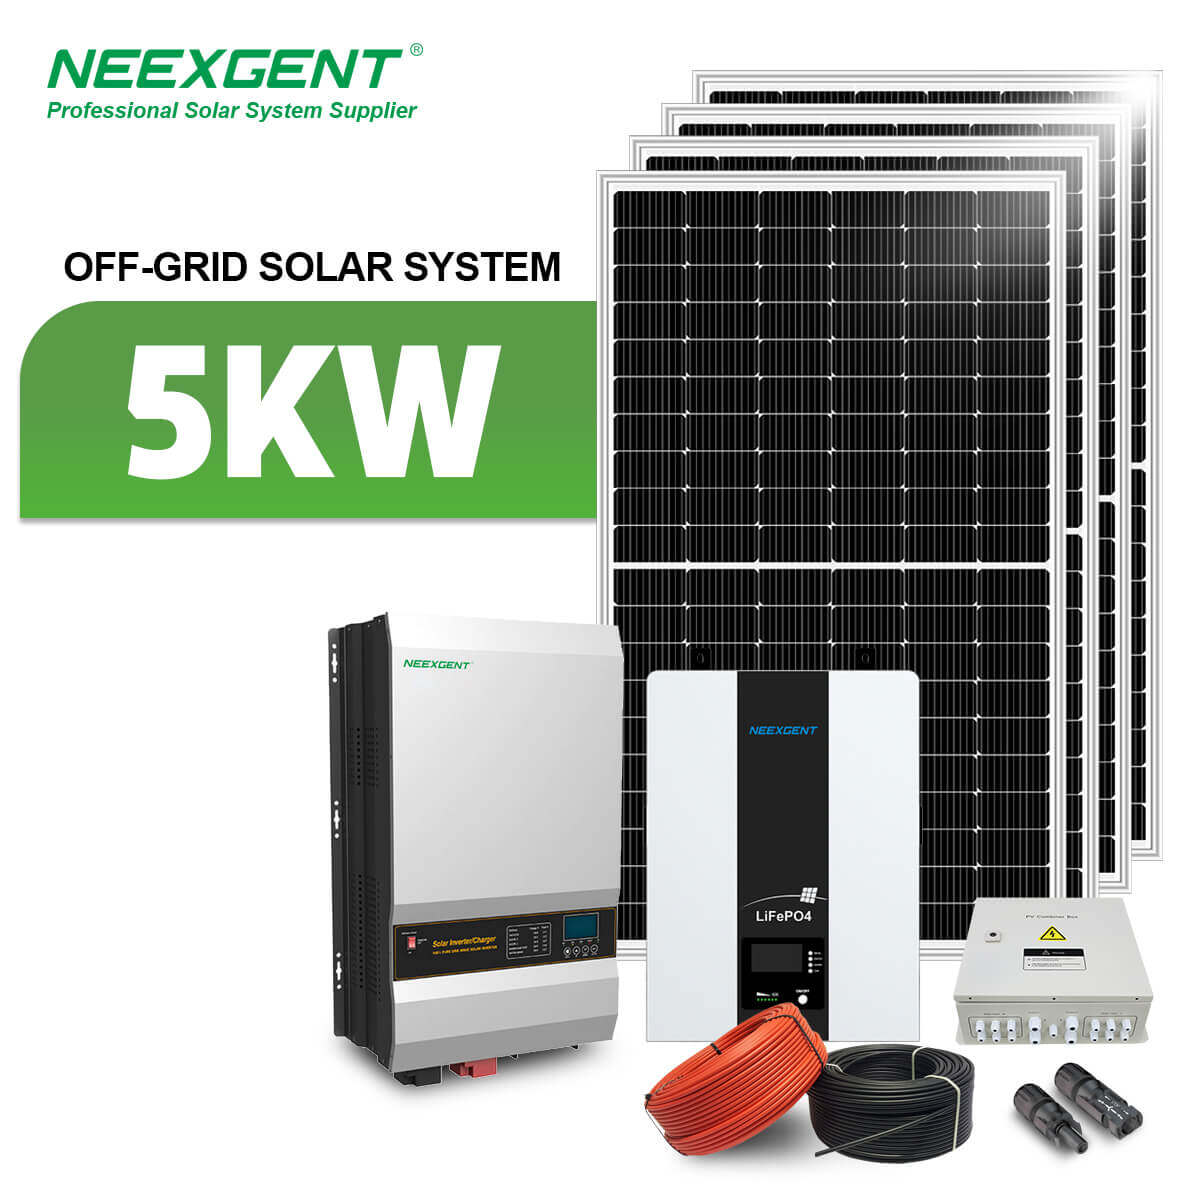 Neexgent solar power system 5kw off-grid solar power system with easy installment